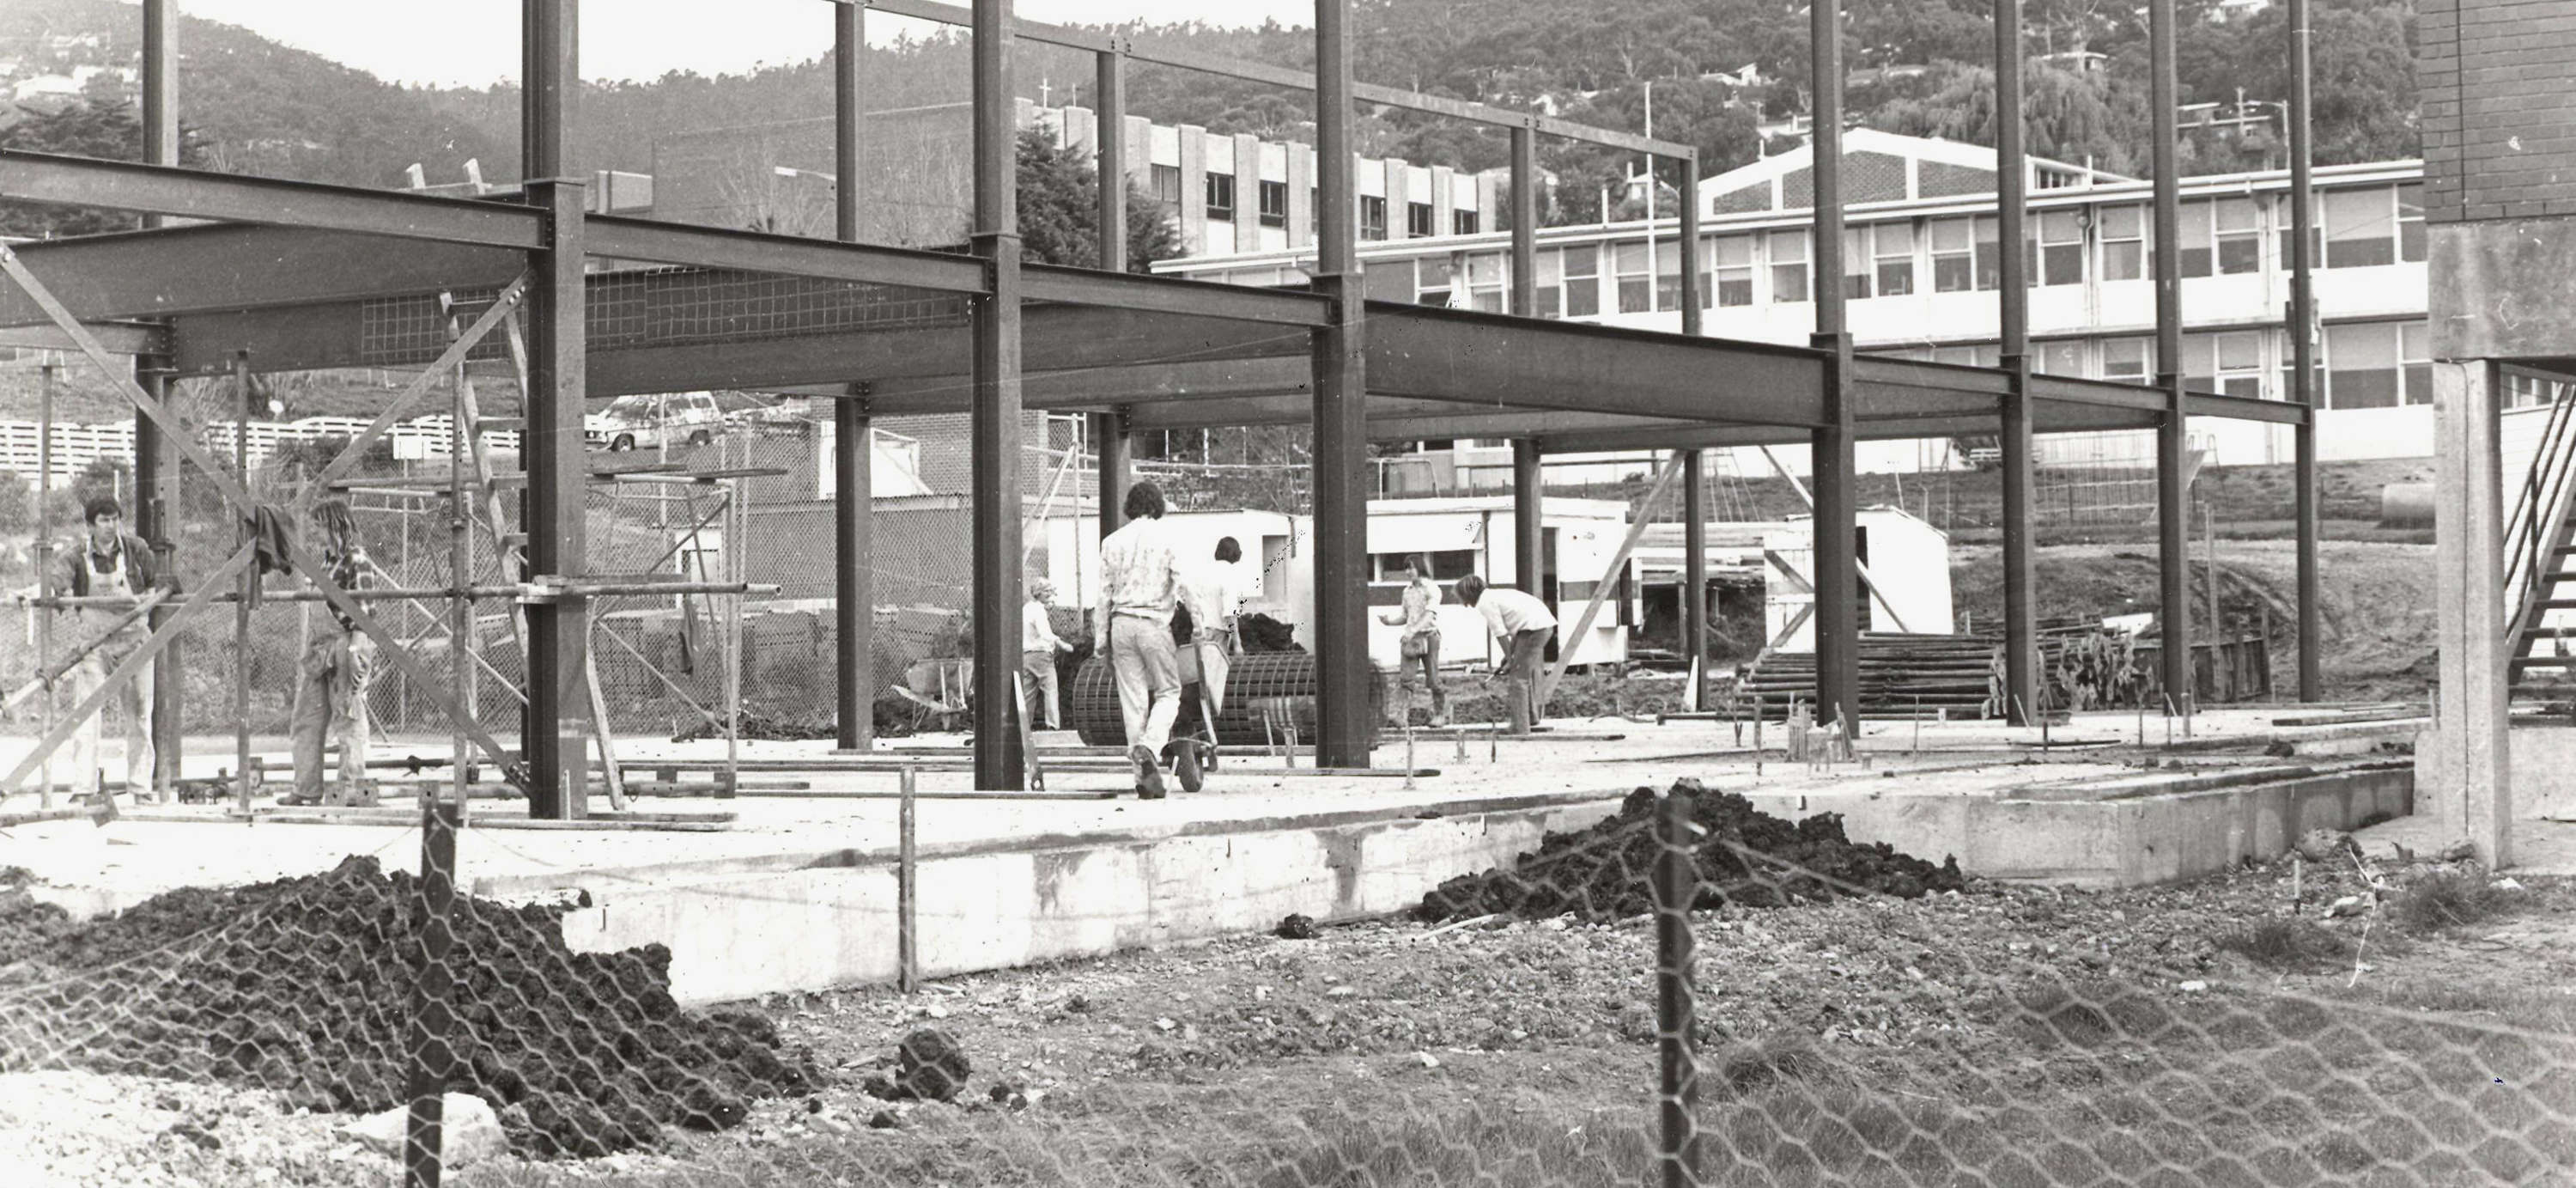 Construction of new Middle School, 1979.